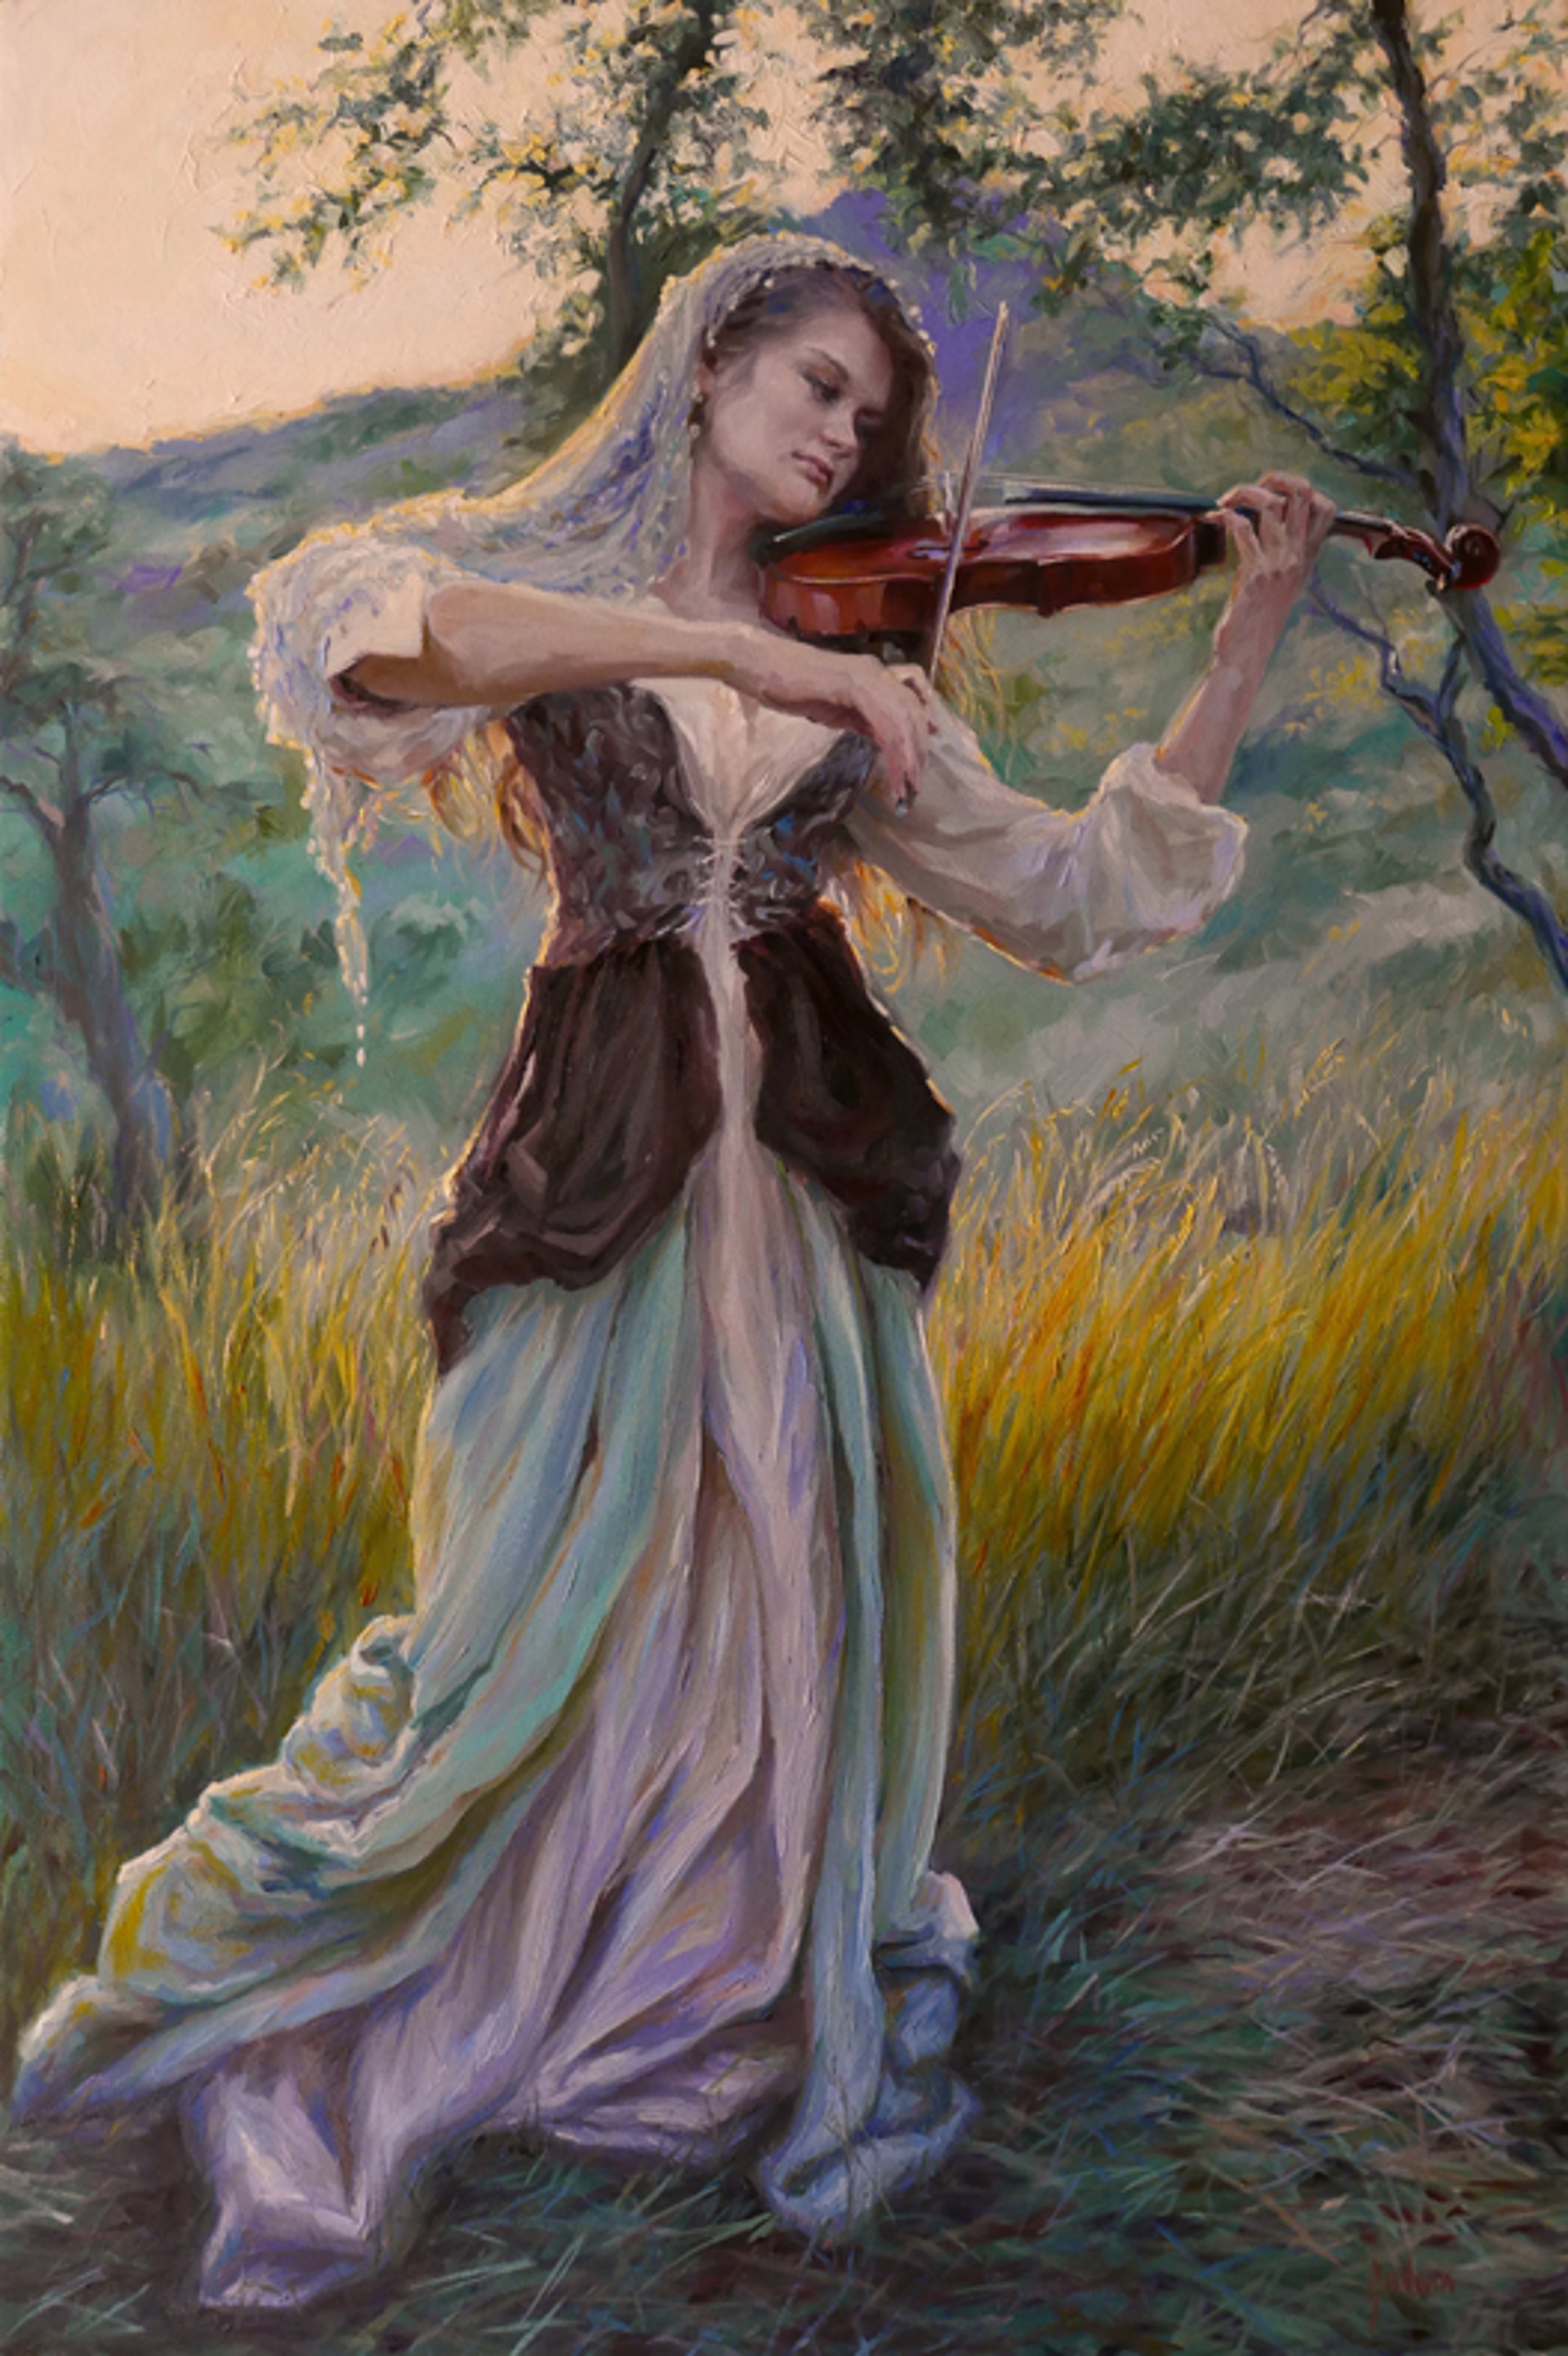 Violinist at Dusk by Lindsay Goodwin